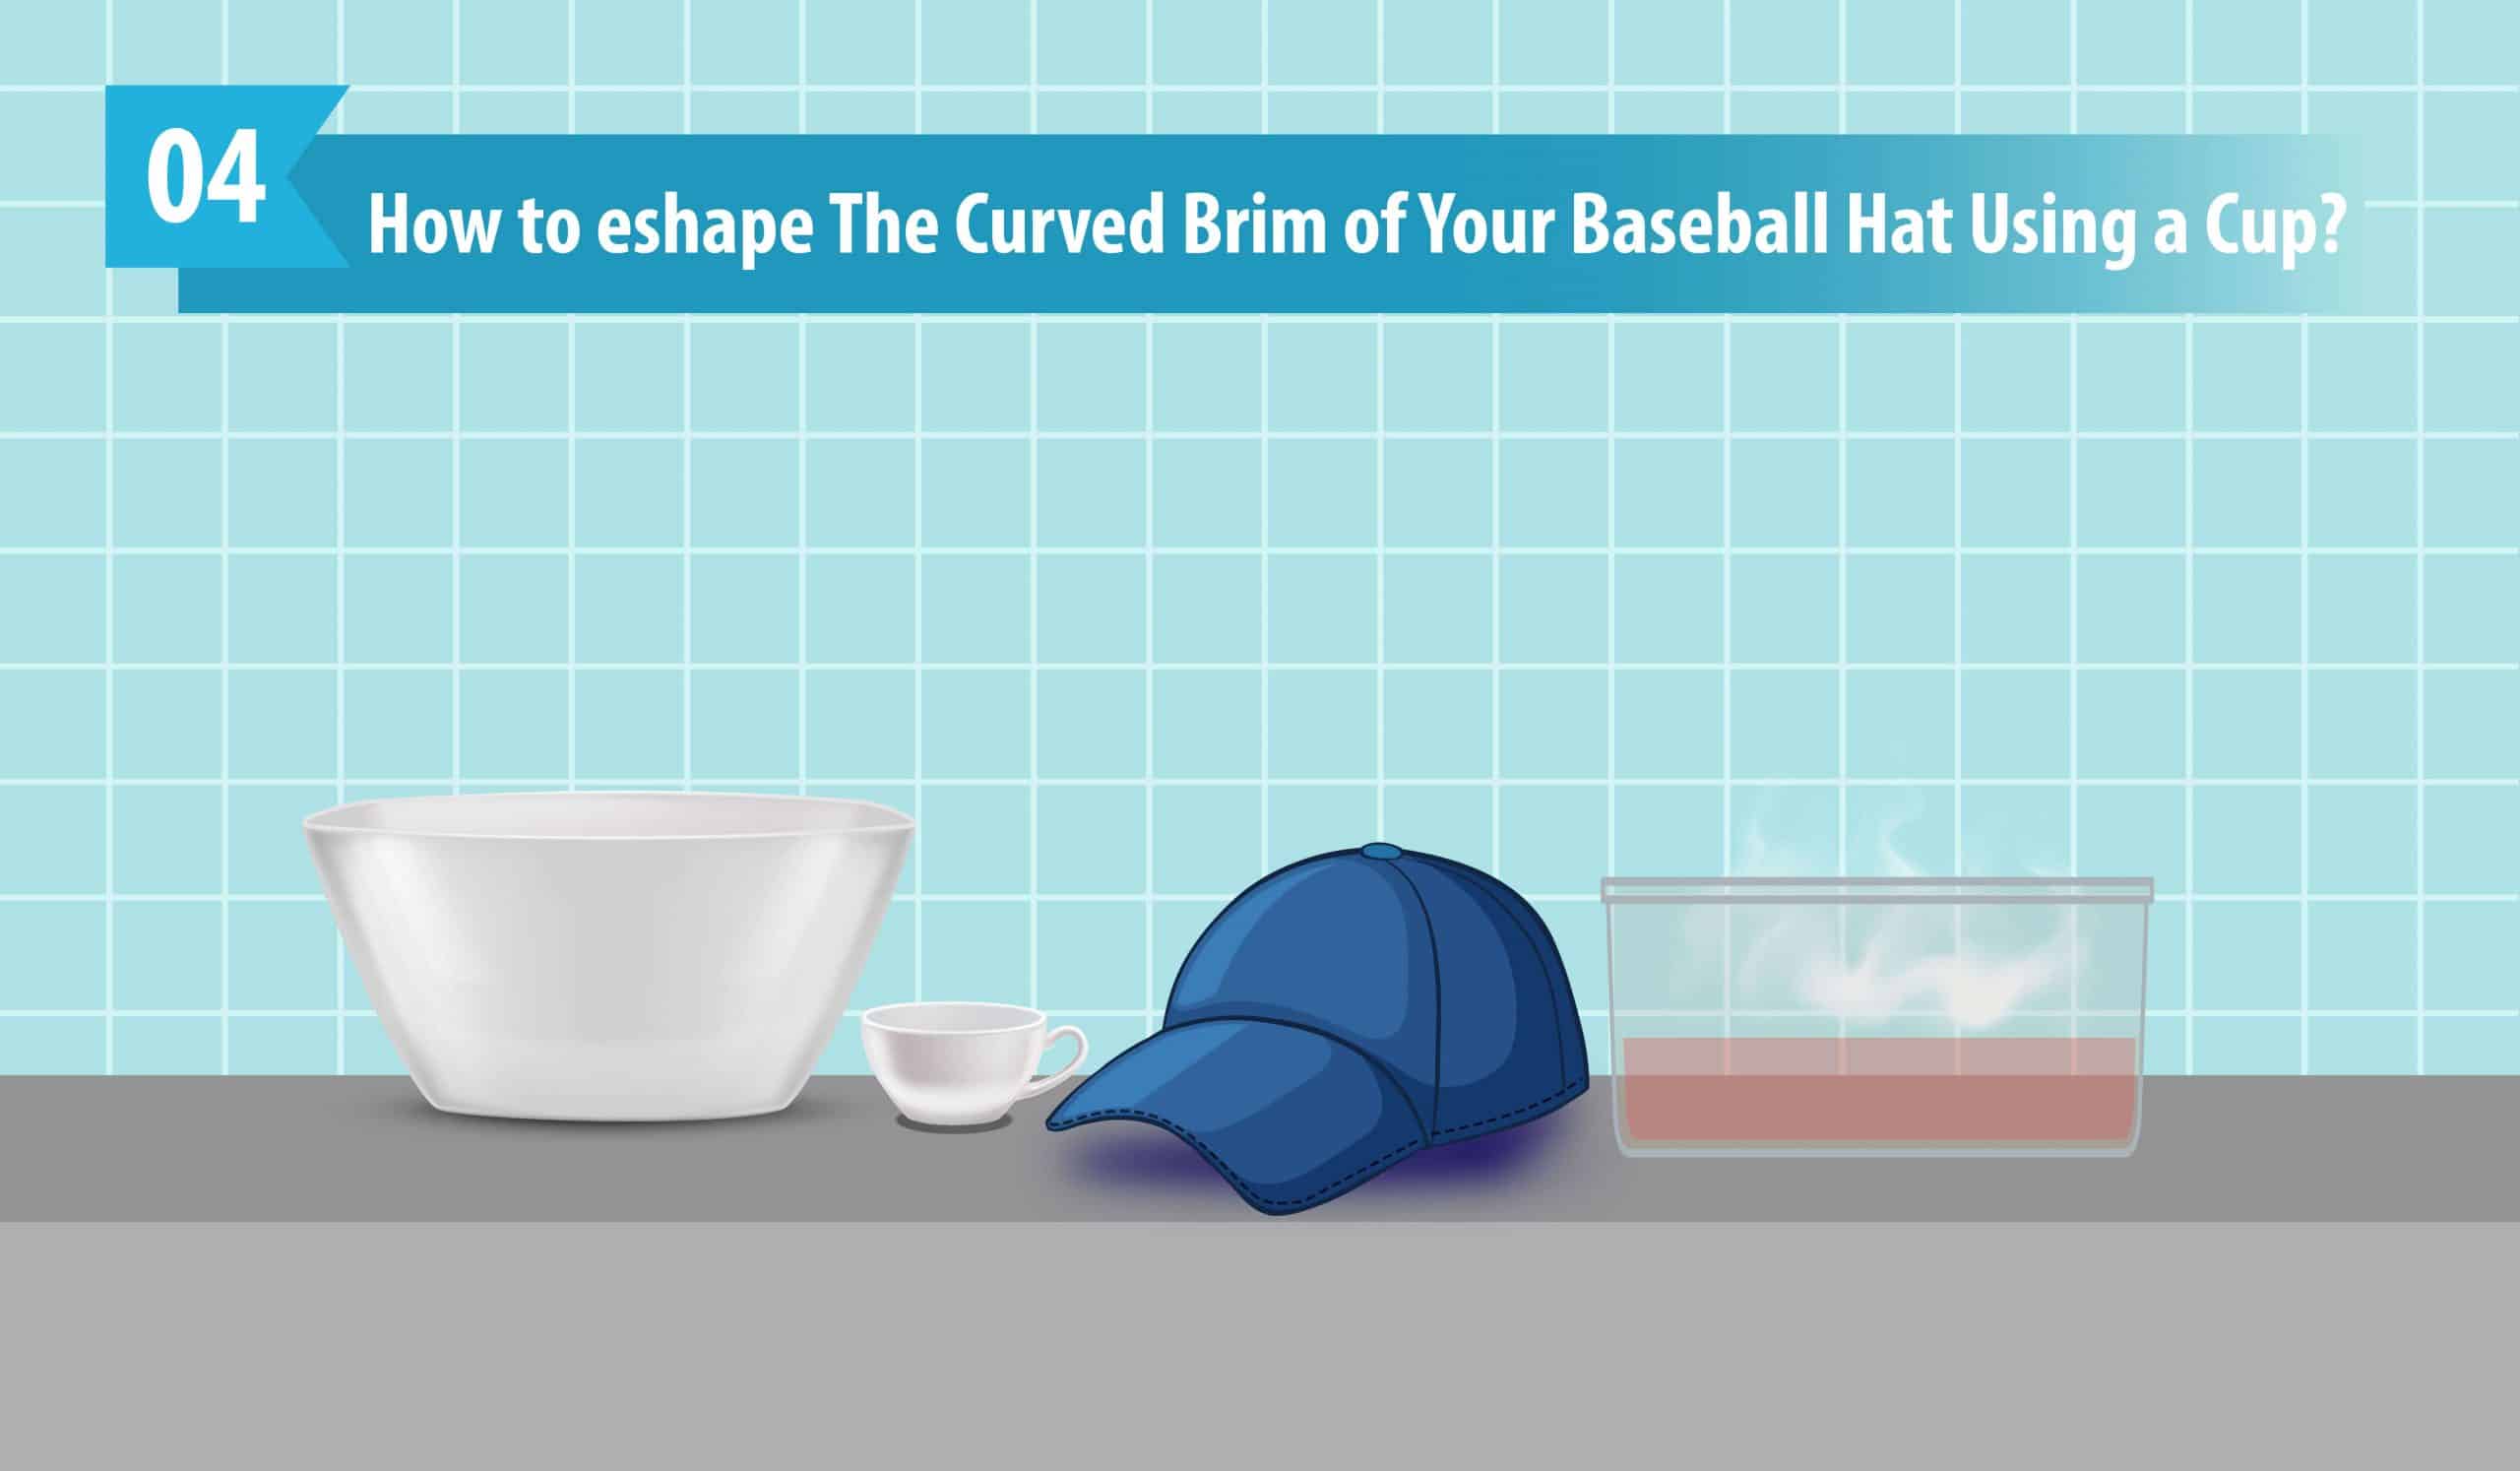 How to Reshape The Curved Brim of Your Baseball Hat Using a Cup